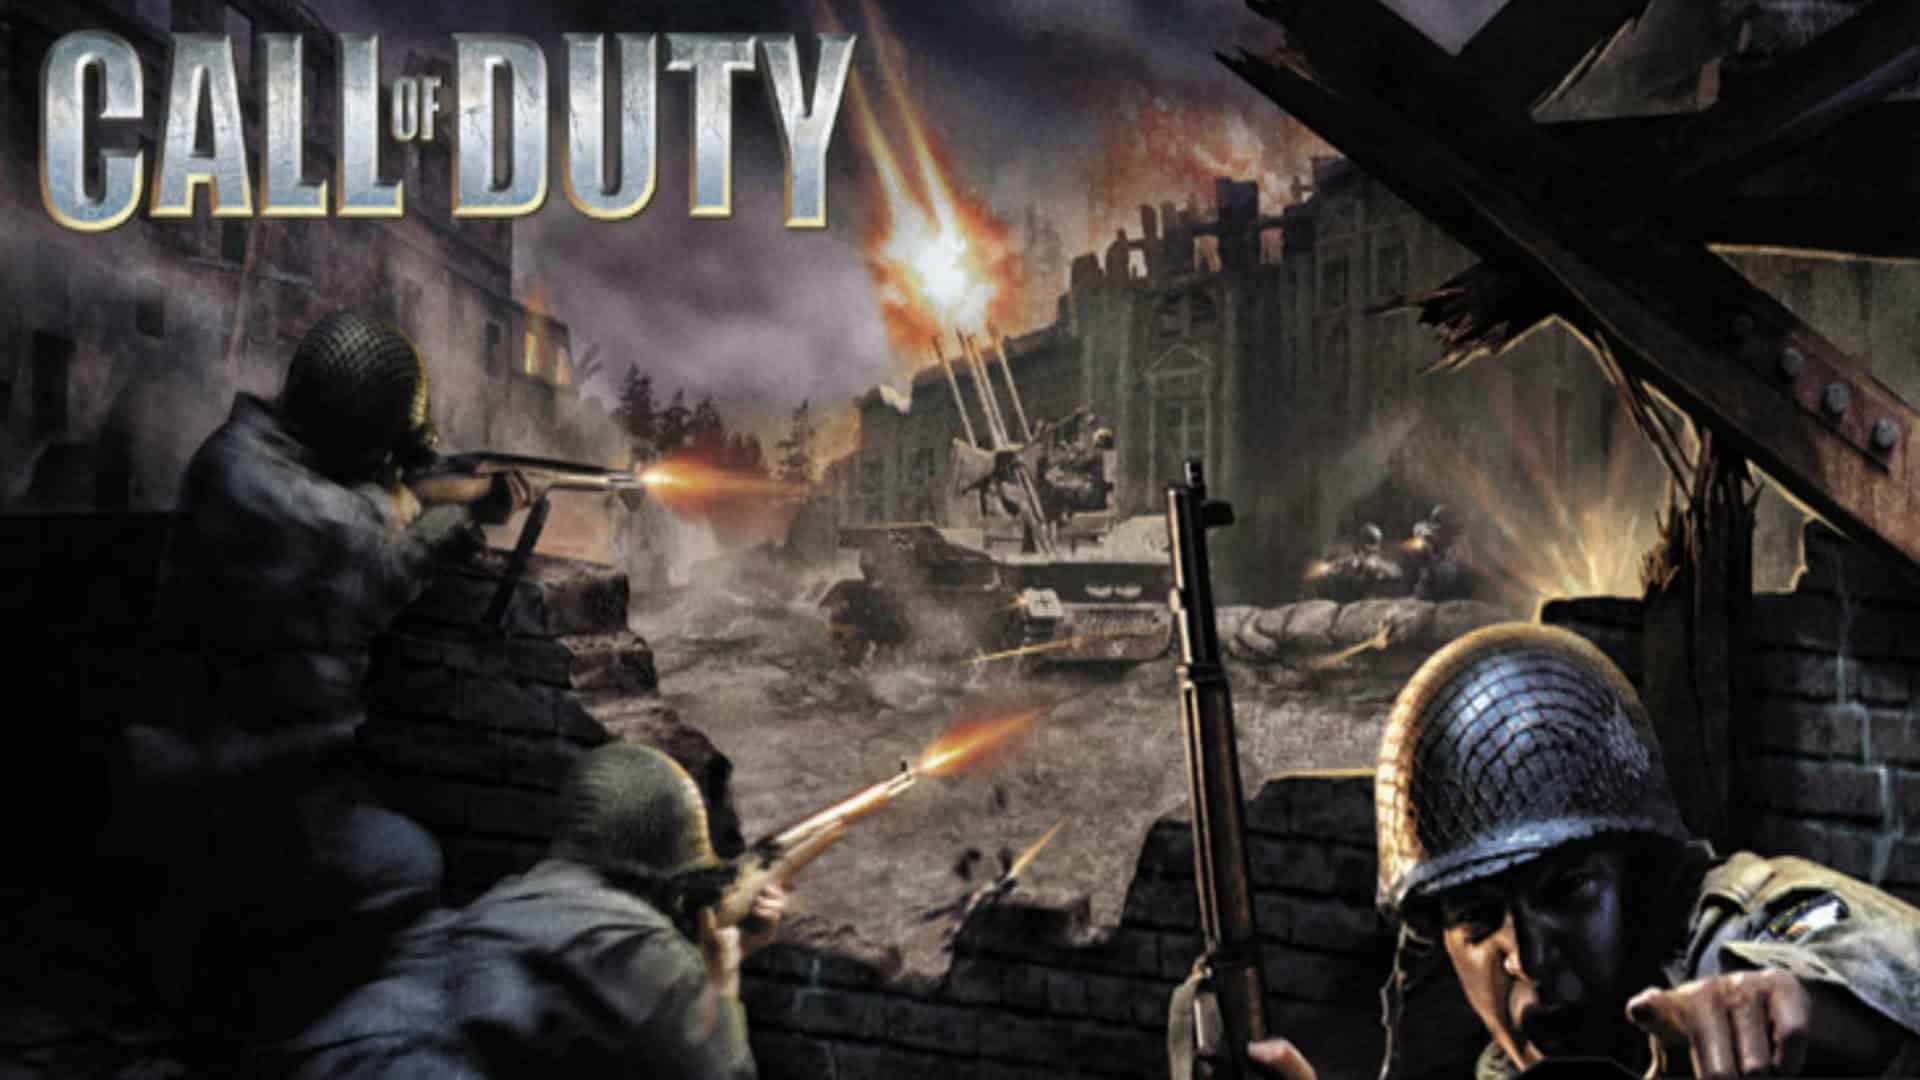 The Complete Call Of Duty Games List in Order